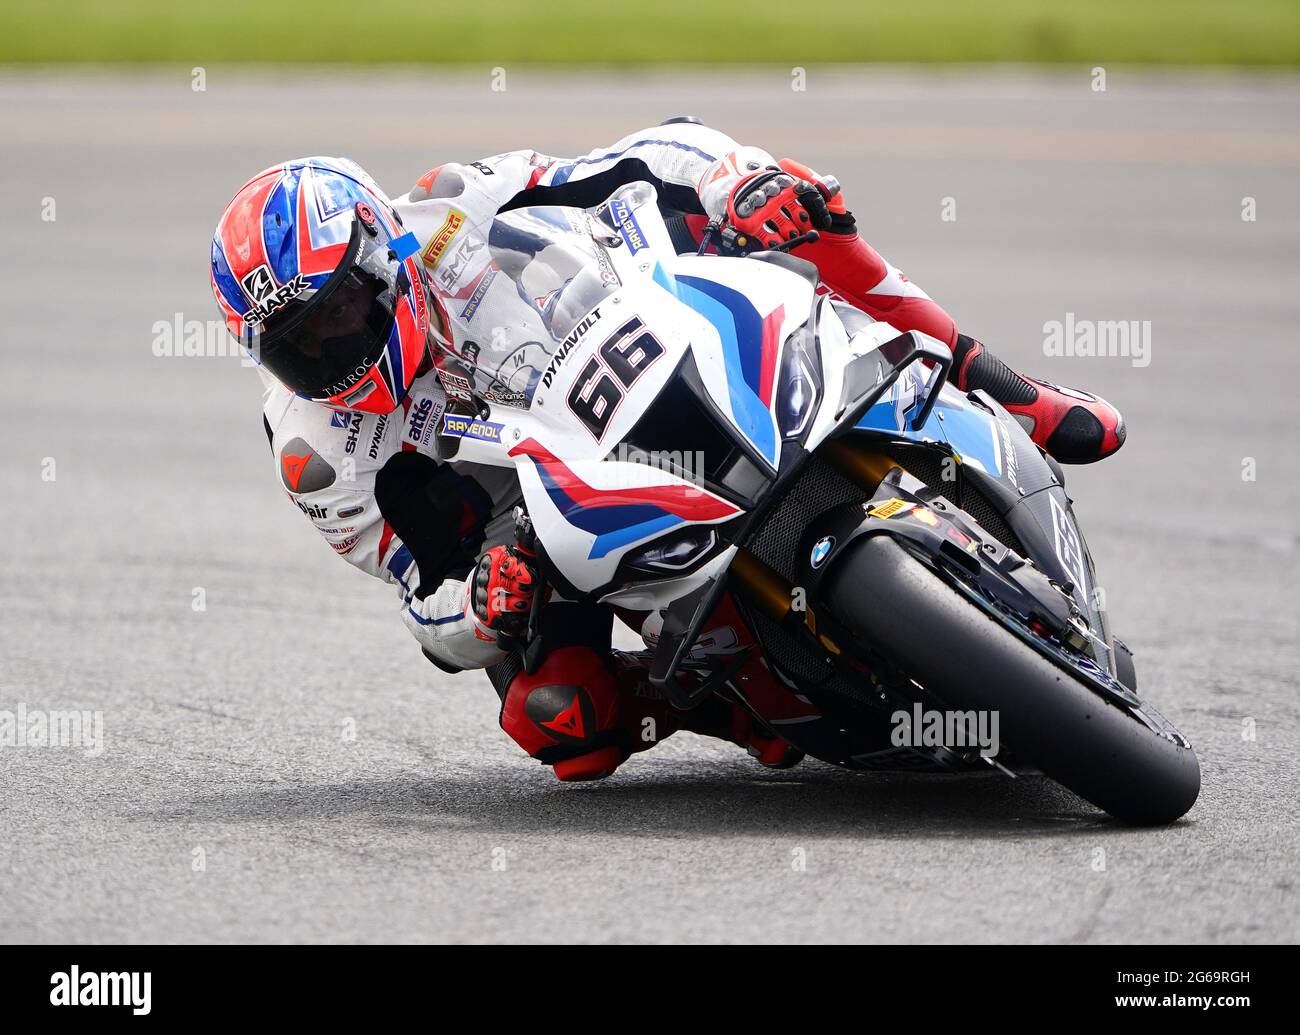 Tom Sykes of BMW Motorrad WorldSBK Team in Race 2 during day two of the Motul Fim Superbike Championship 2021 at Donington Park, Leicestershire. Saturday July 4, 2021. Stock Photo